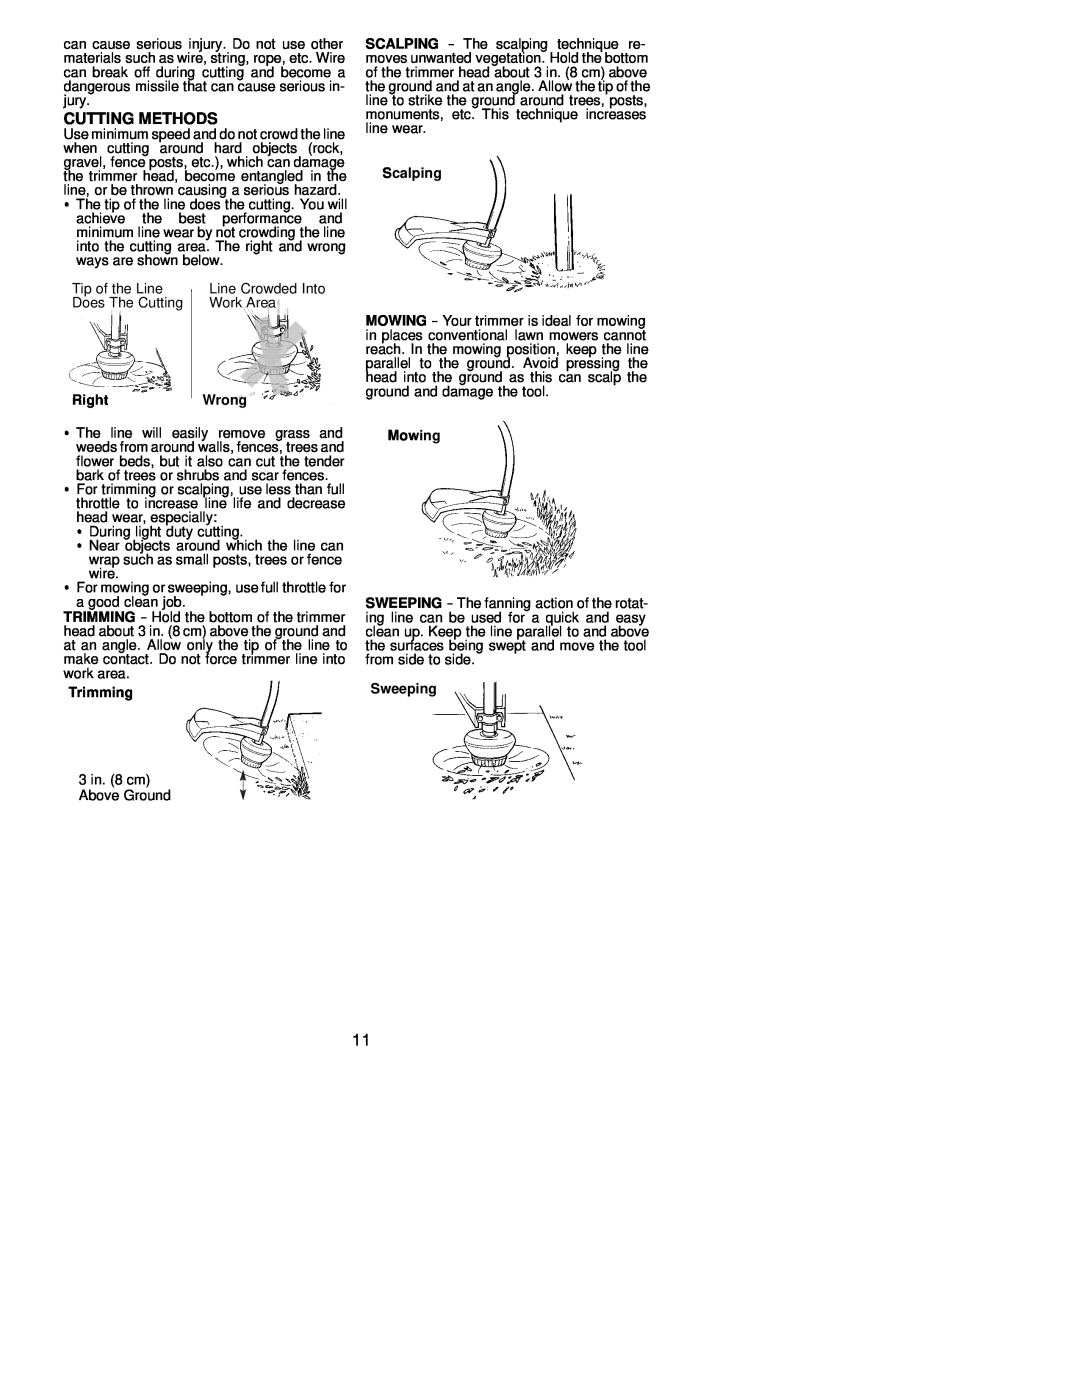 Weed Eater 530163734 instruction manual Cutting Methods, RightWrong, Trimming, Scalping, Mowing, Sweeping 